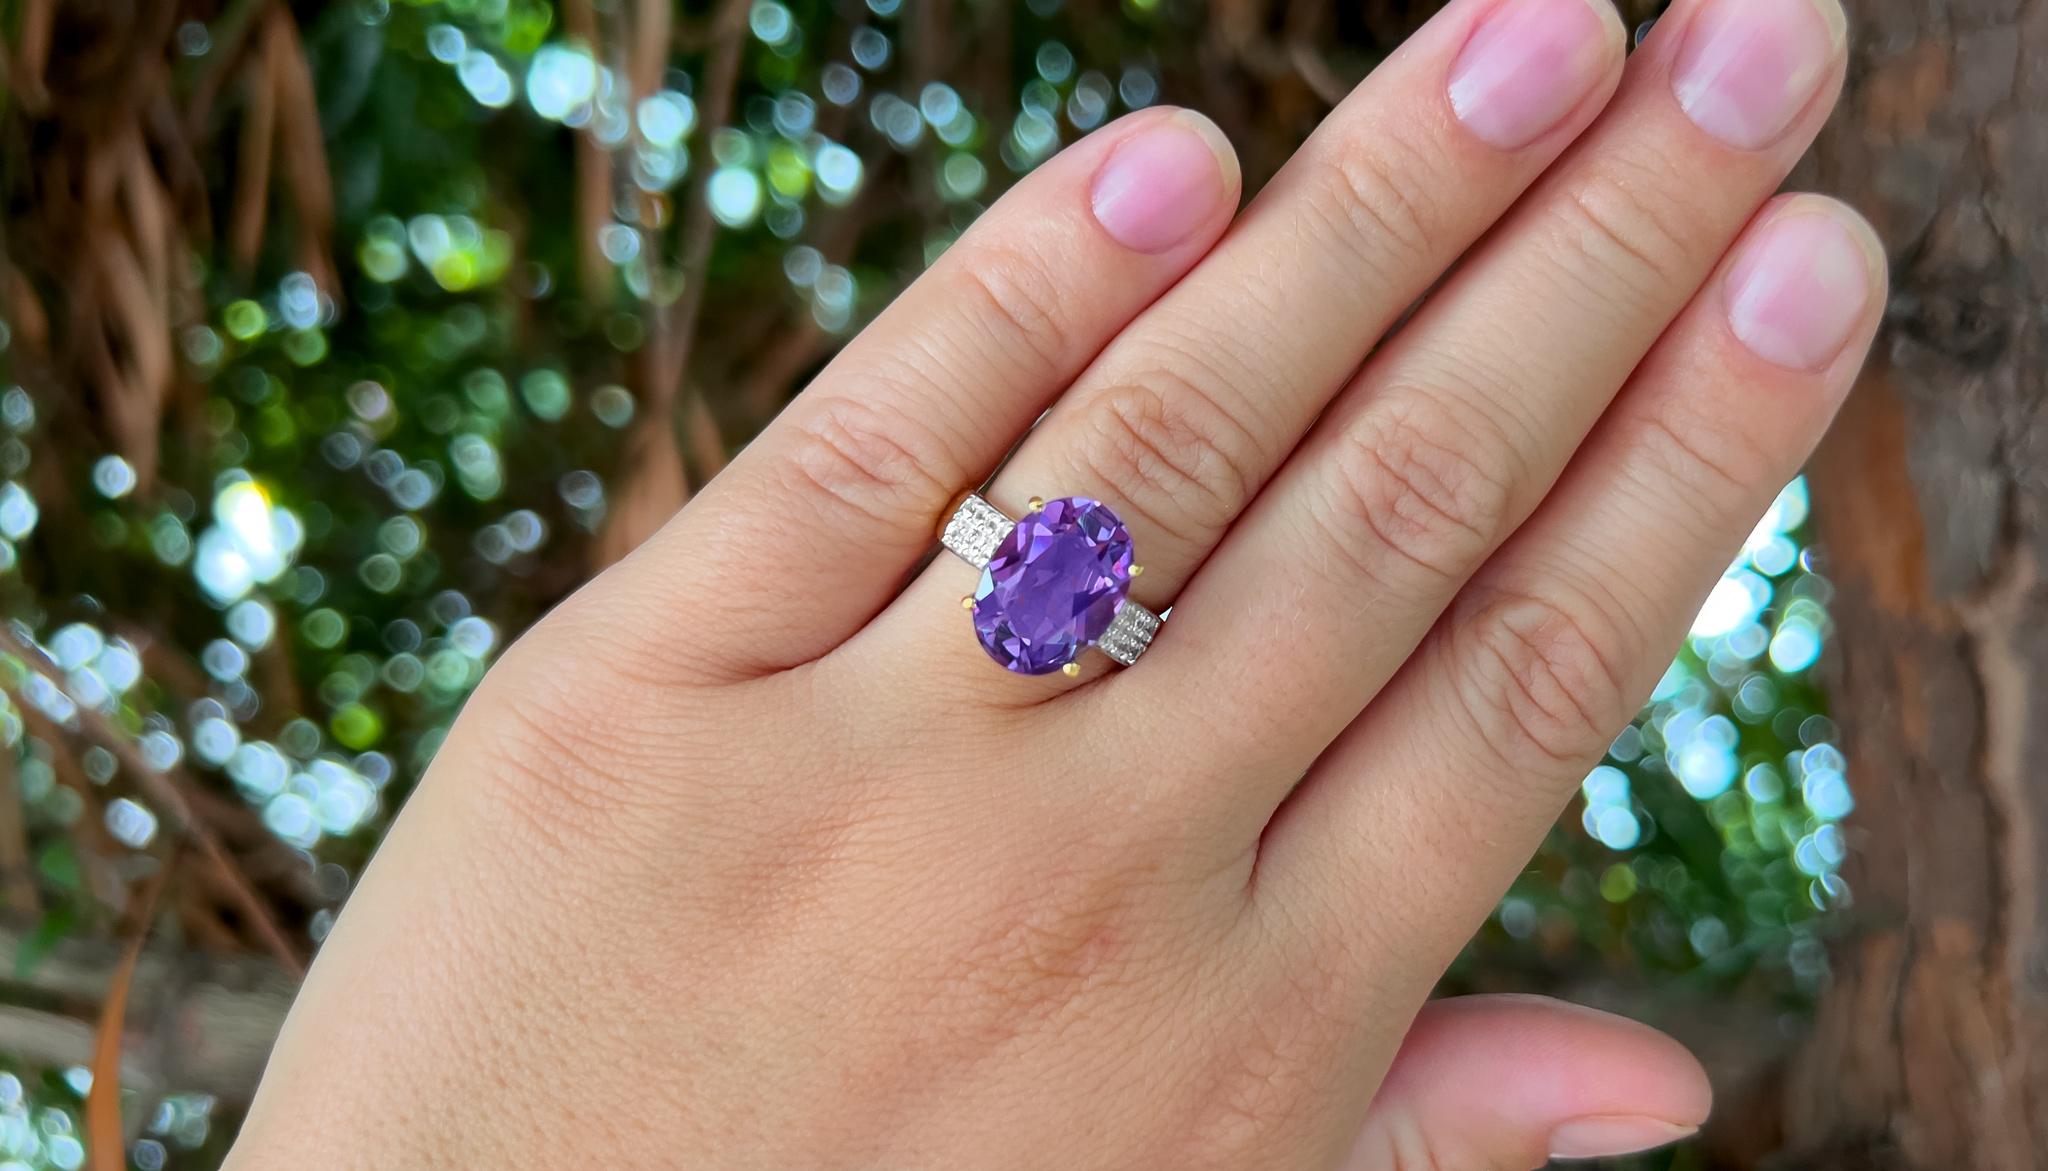 Amethyst = 4.50 Carat
Stone Size: 14 x 10 x 6 mm
Cut: Oval
8 Round Diamonds =  0.24 Carats
( Clarity: VS; Color: H )
Metal: 14K Yellow Gold
Ring Size: 6.75* US
*It can be resized complimentary